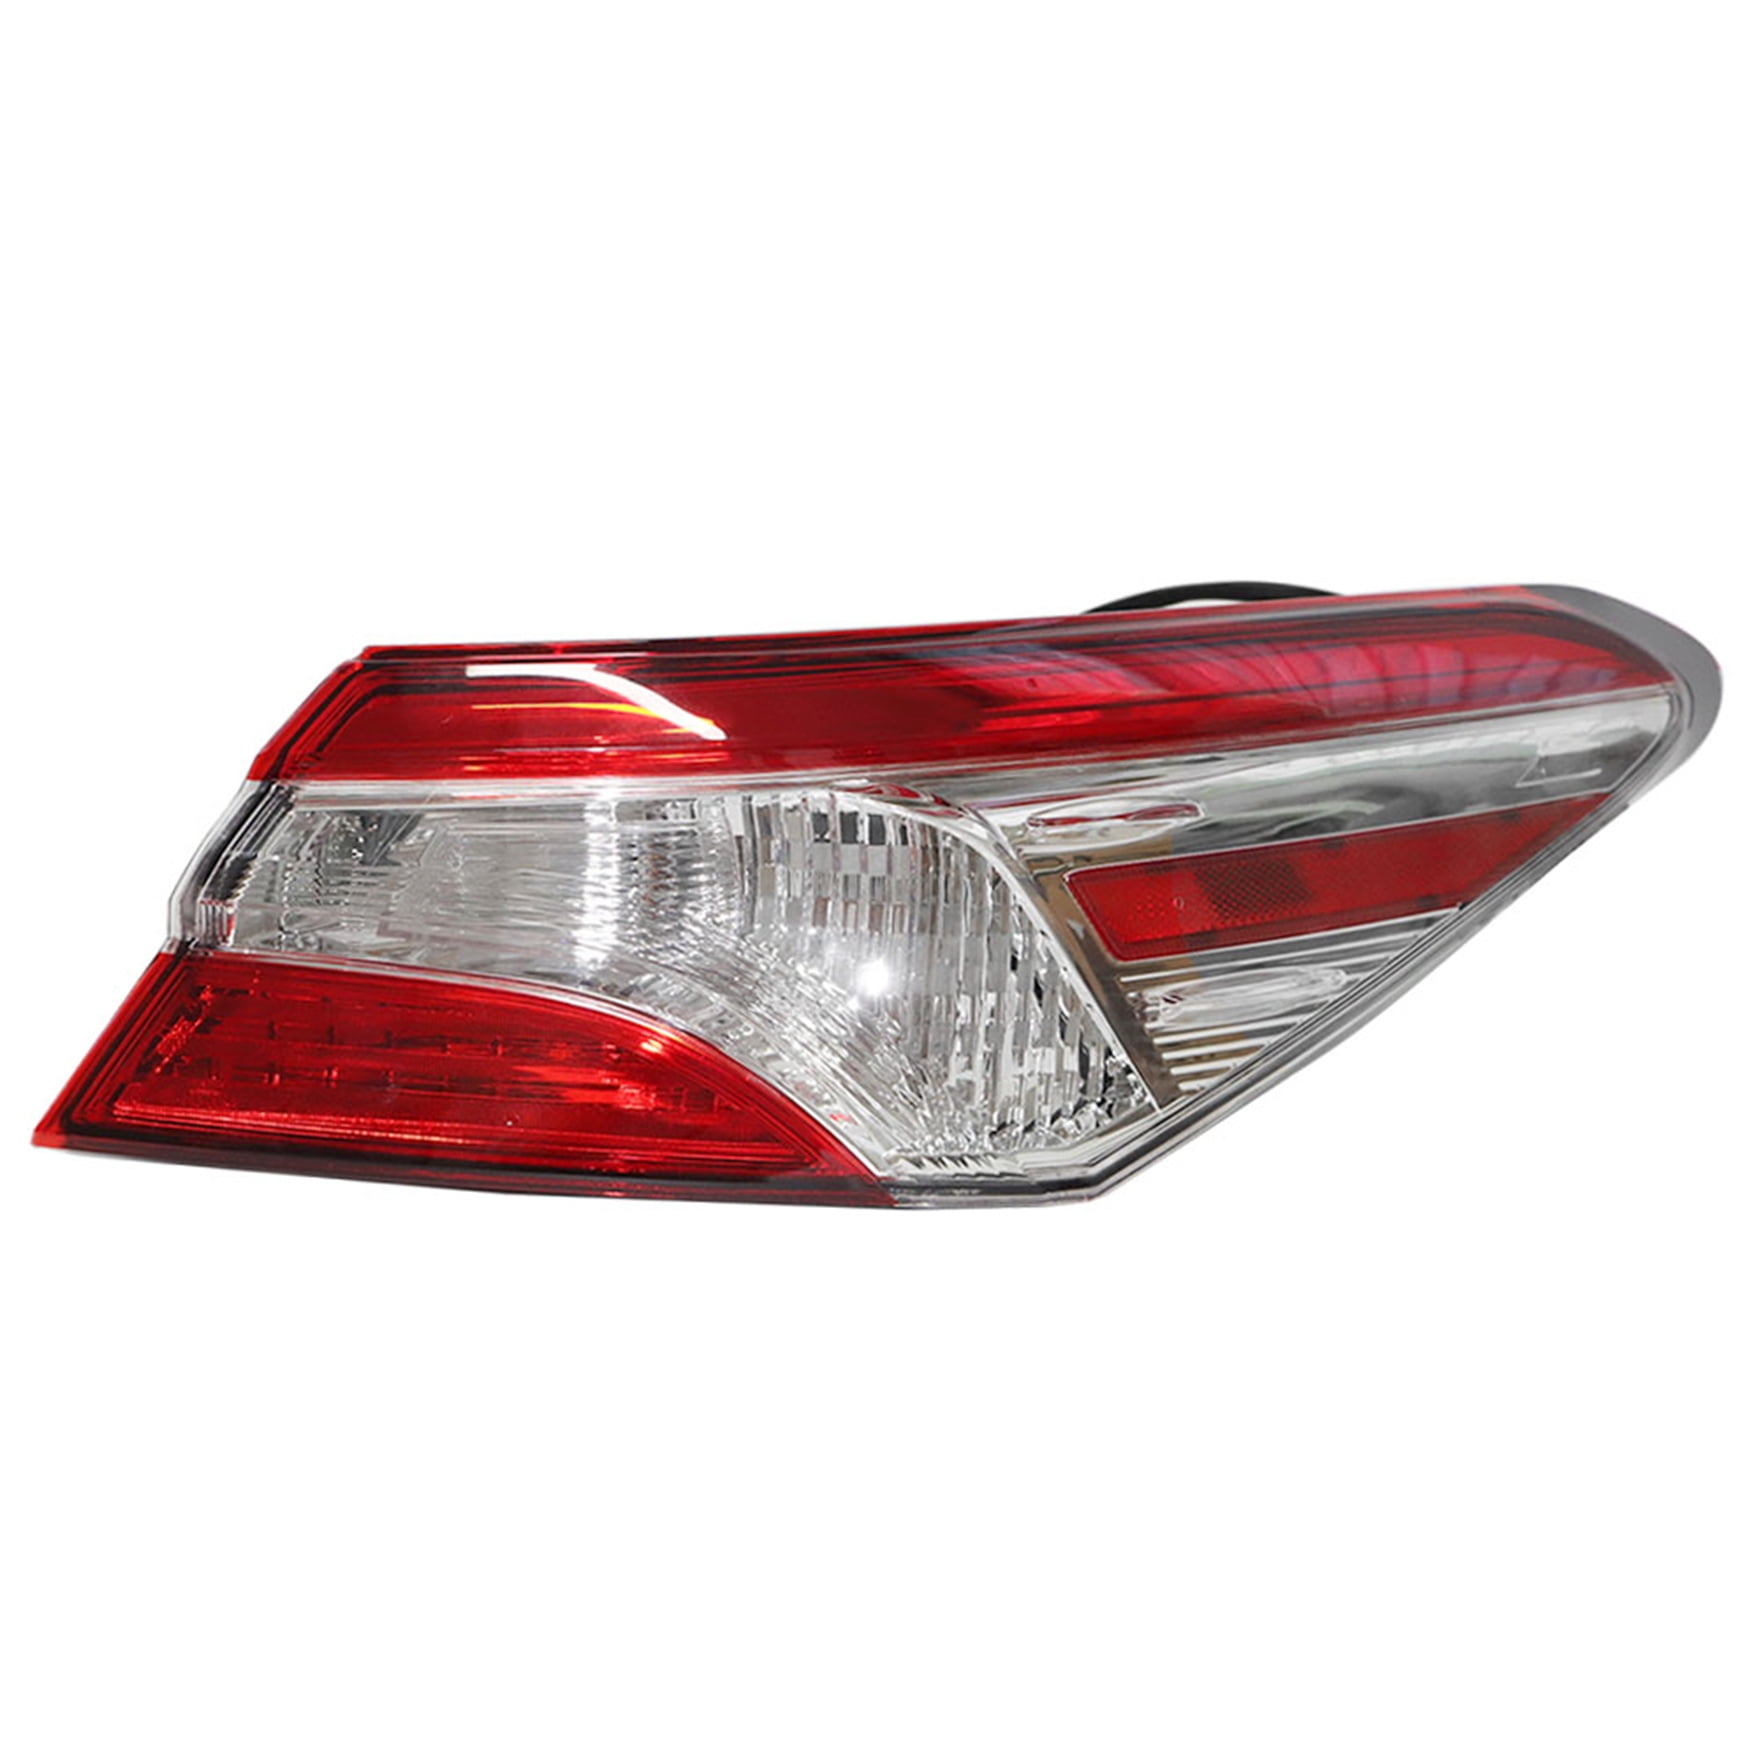 Rear Right Tail Light Assembly Replacement for 2018-2020 Camry